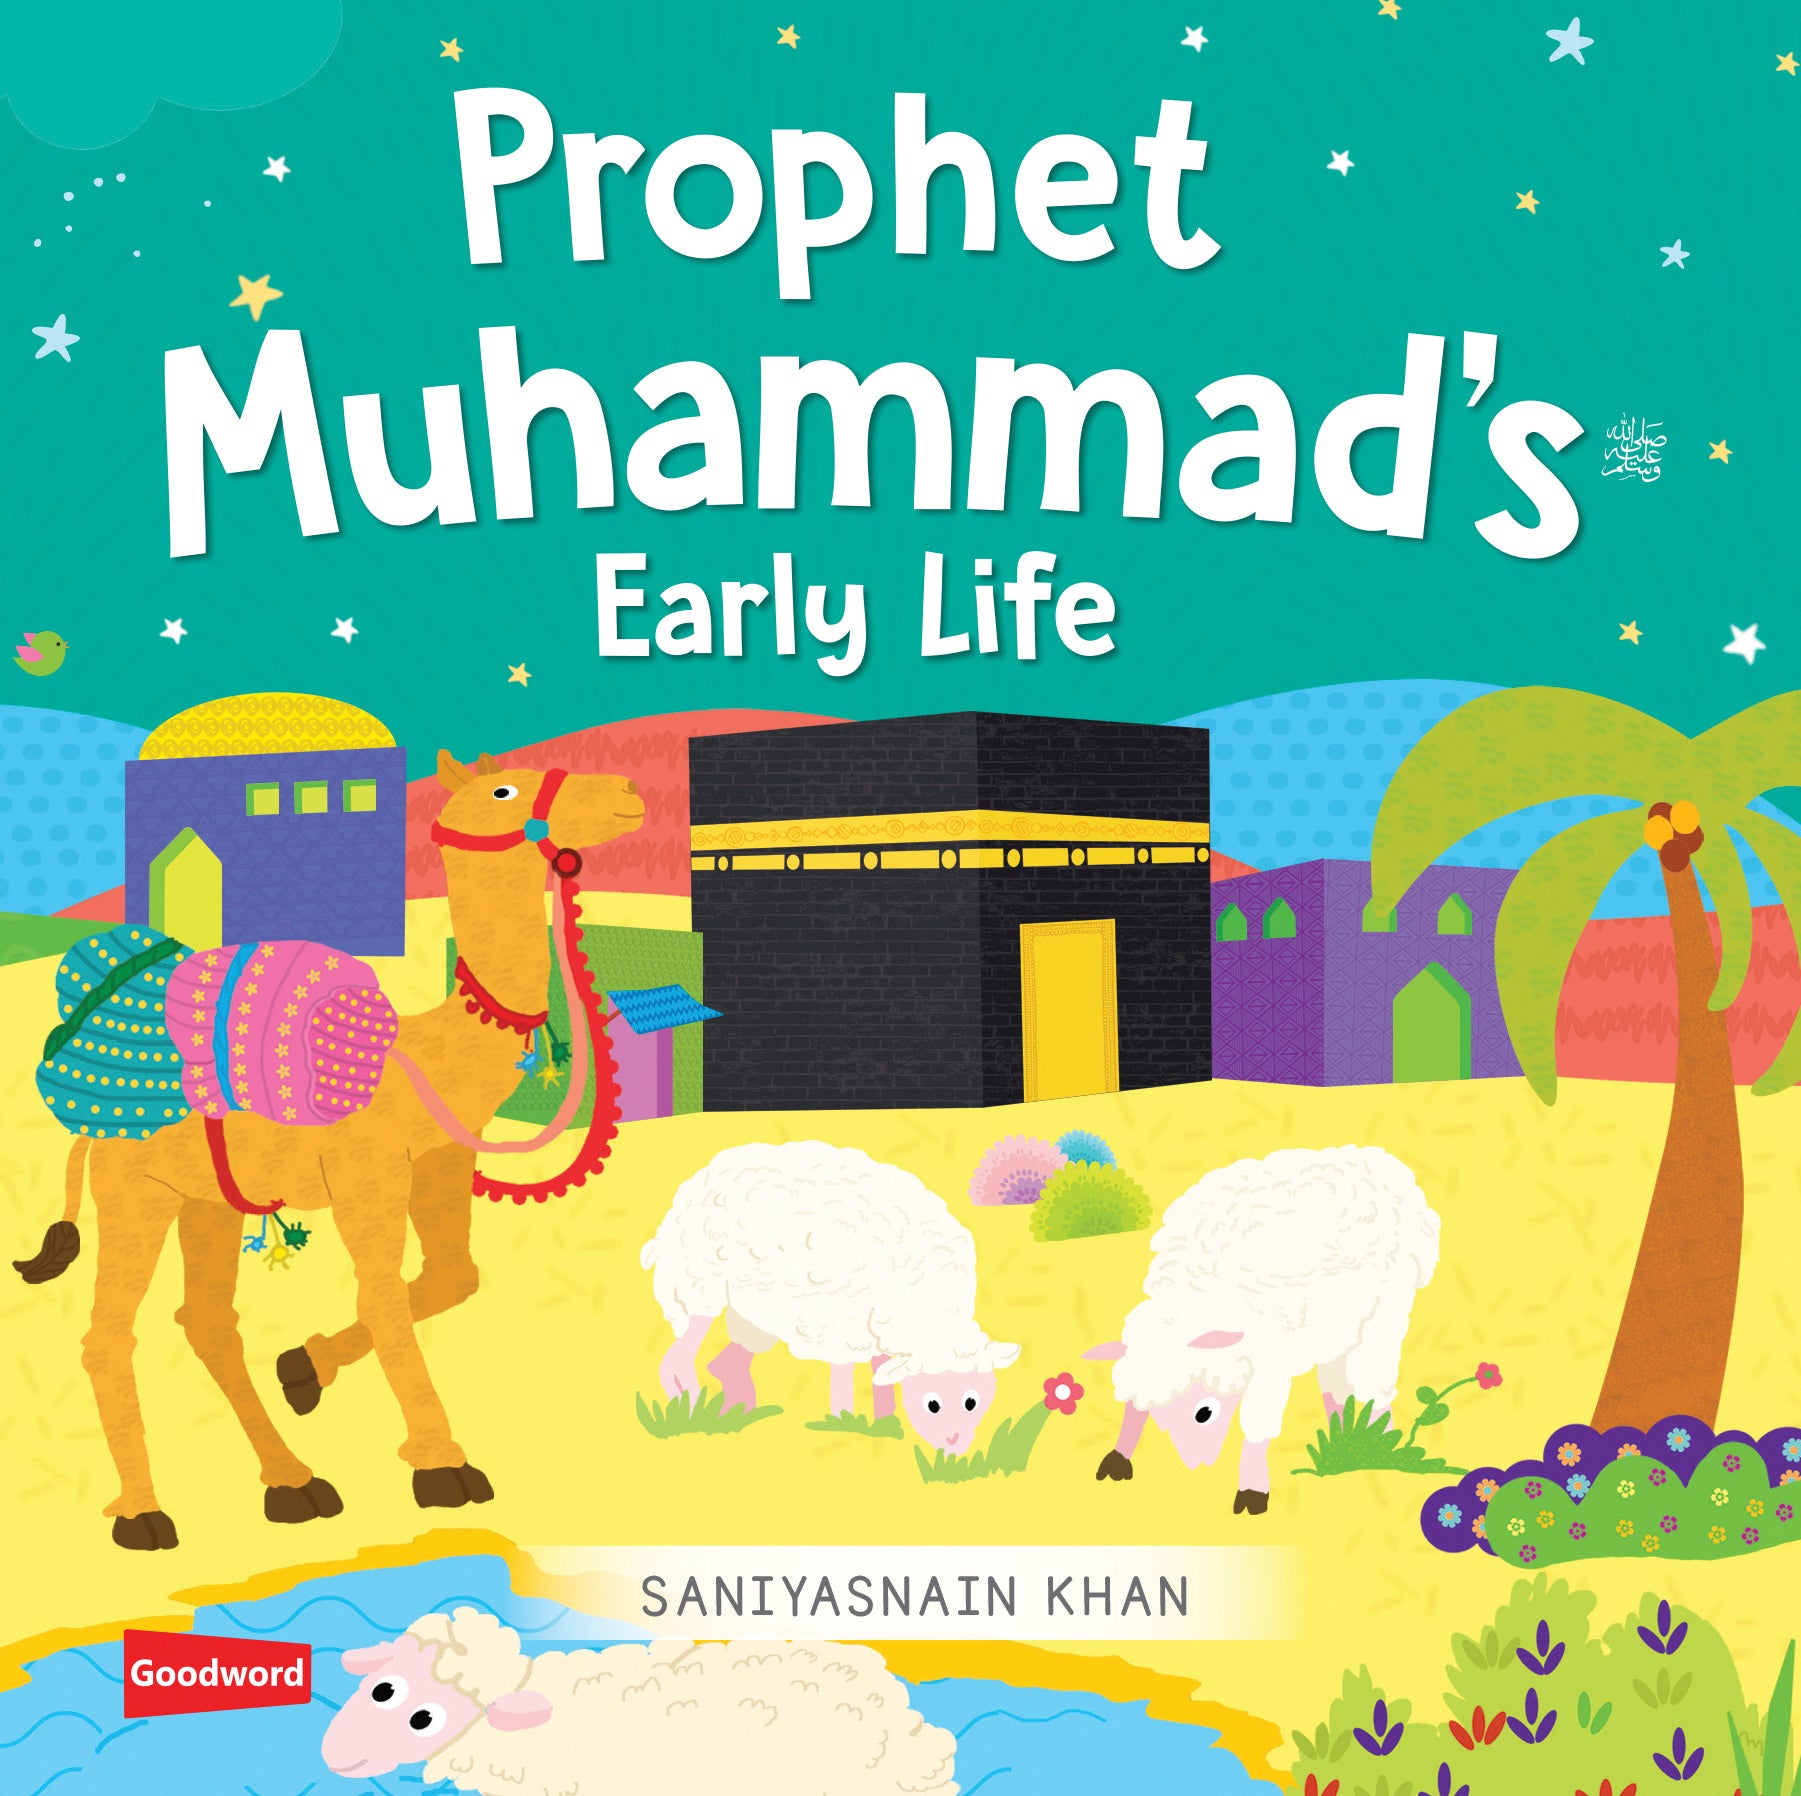 Toddler Story Books (Board Book) Stories of the Prophets